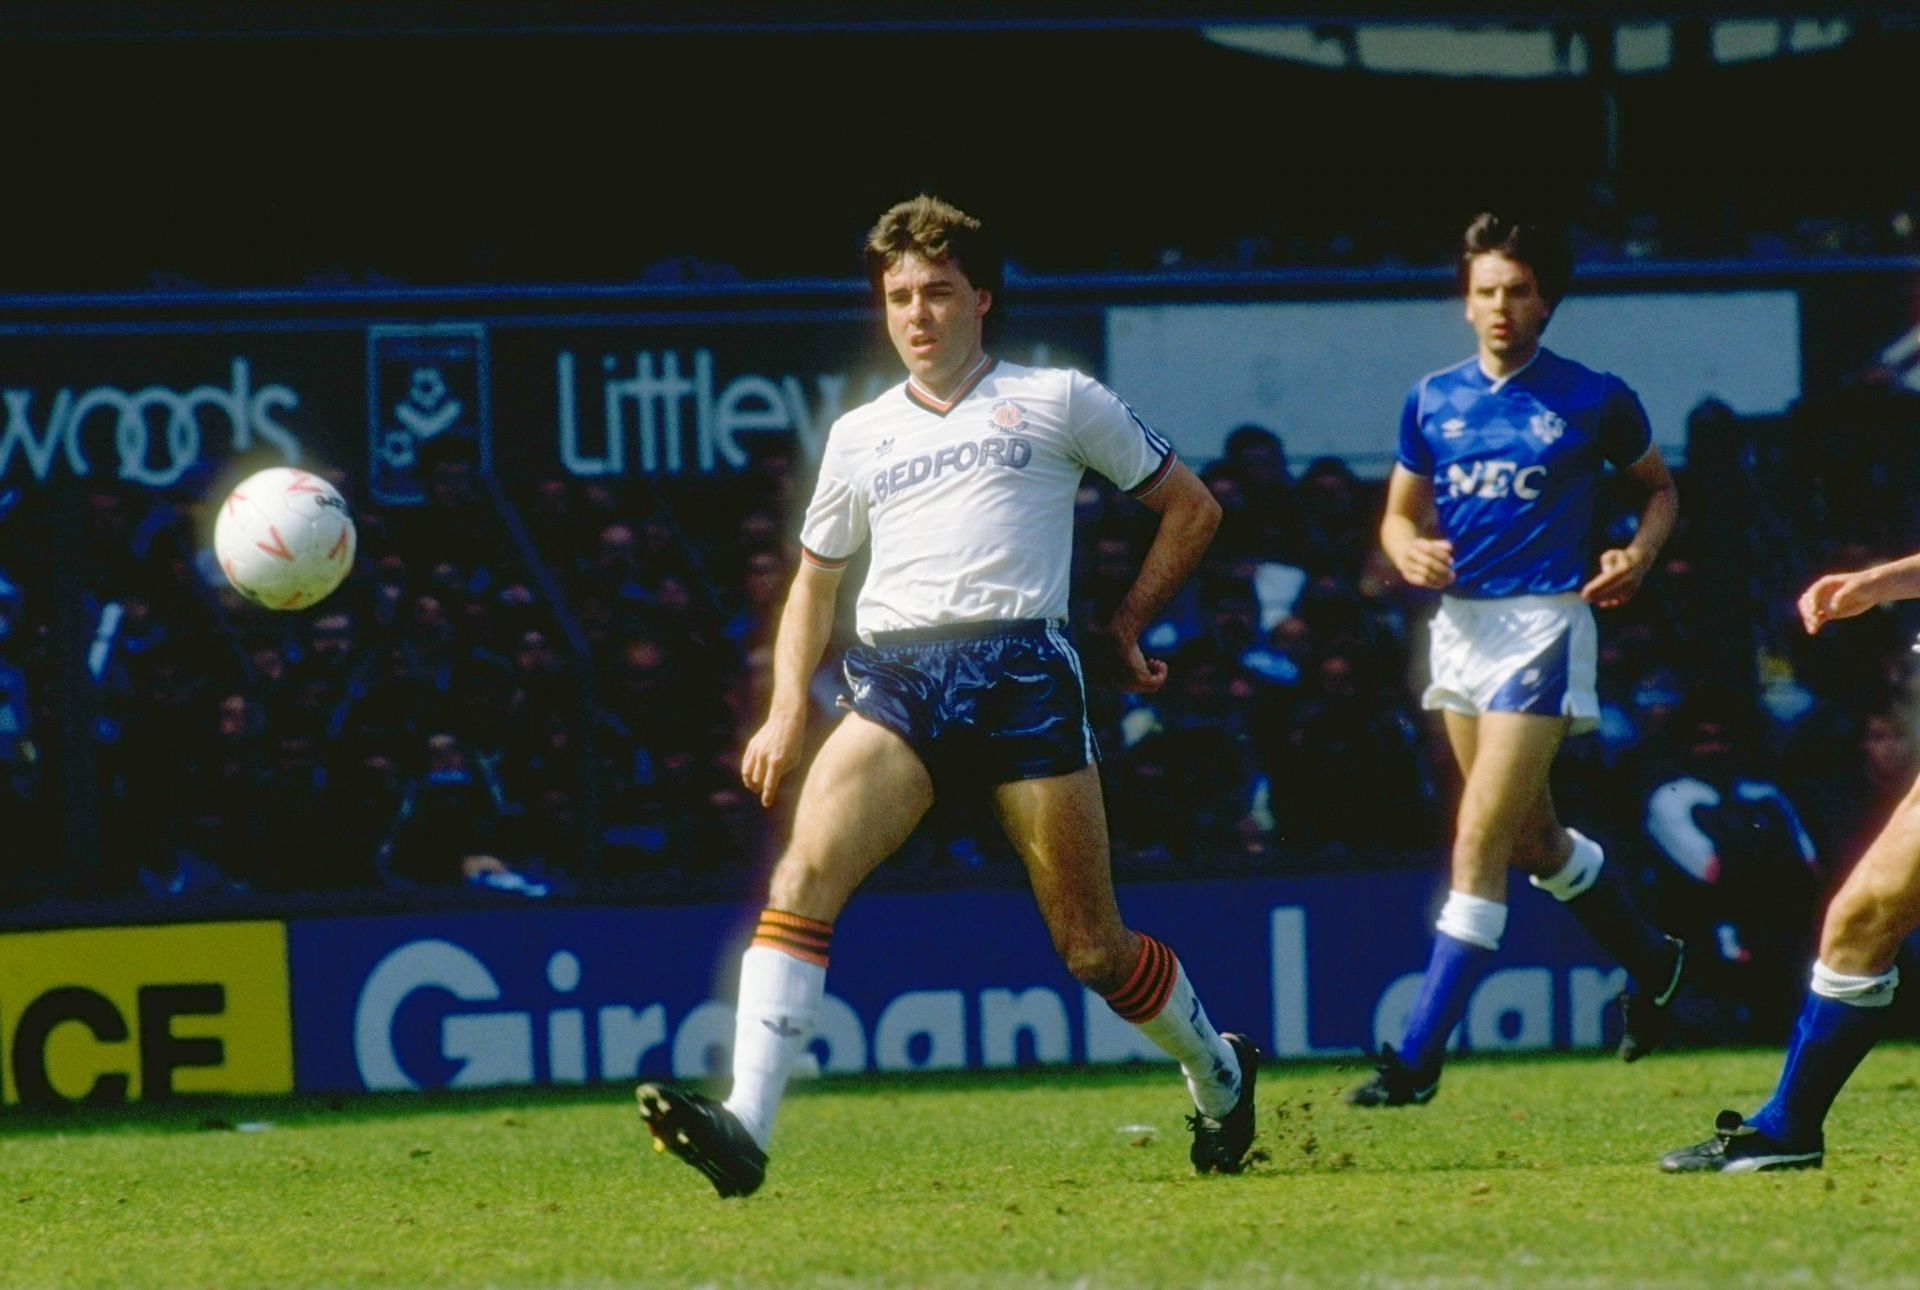 Mal Donaghy joined Chelsea in 1992